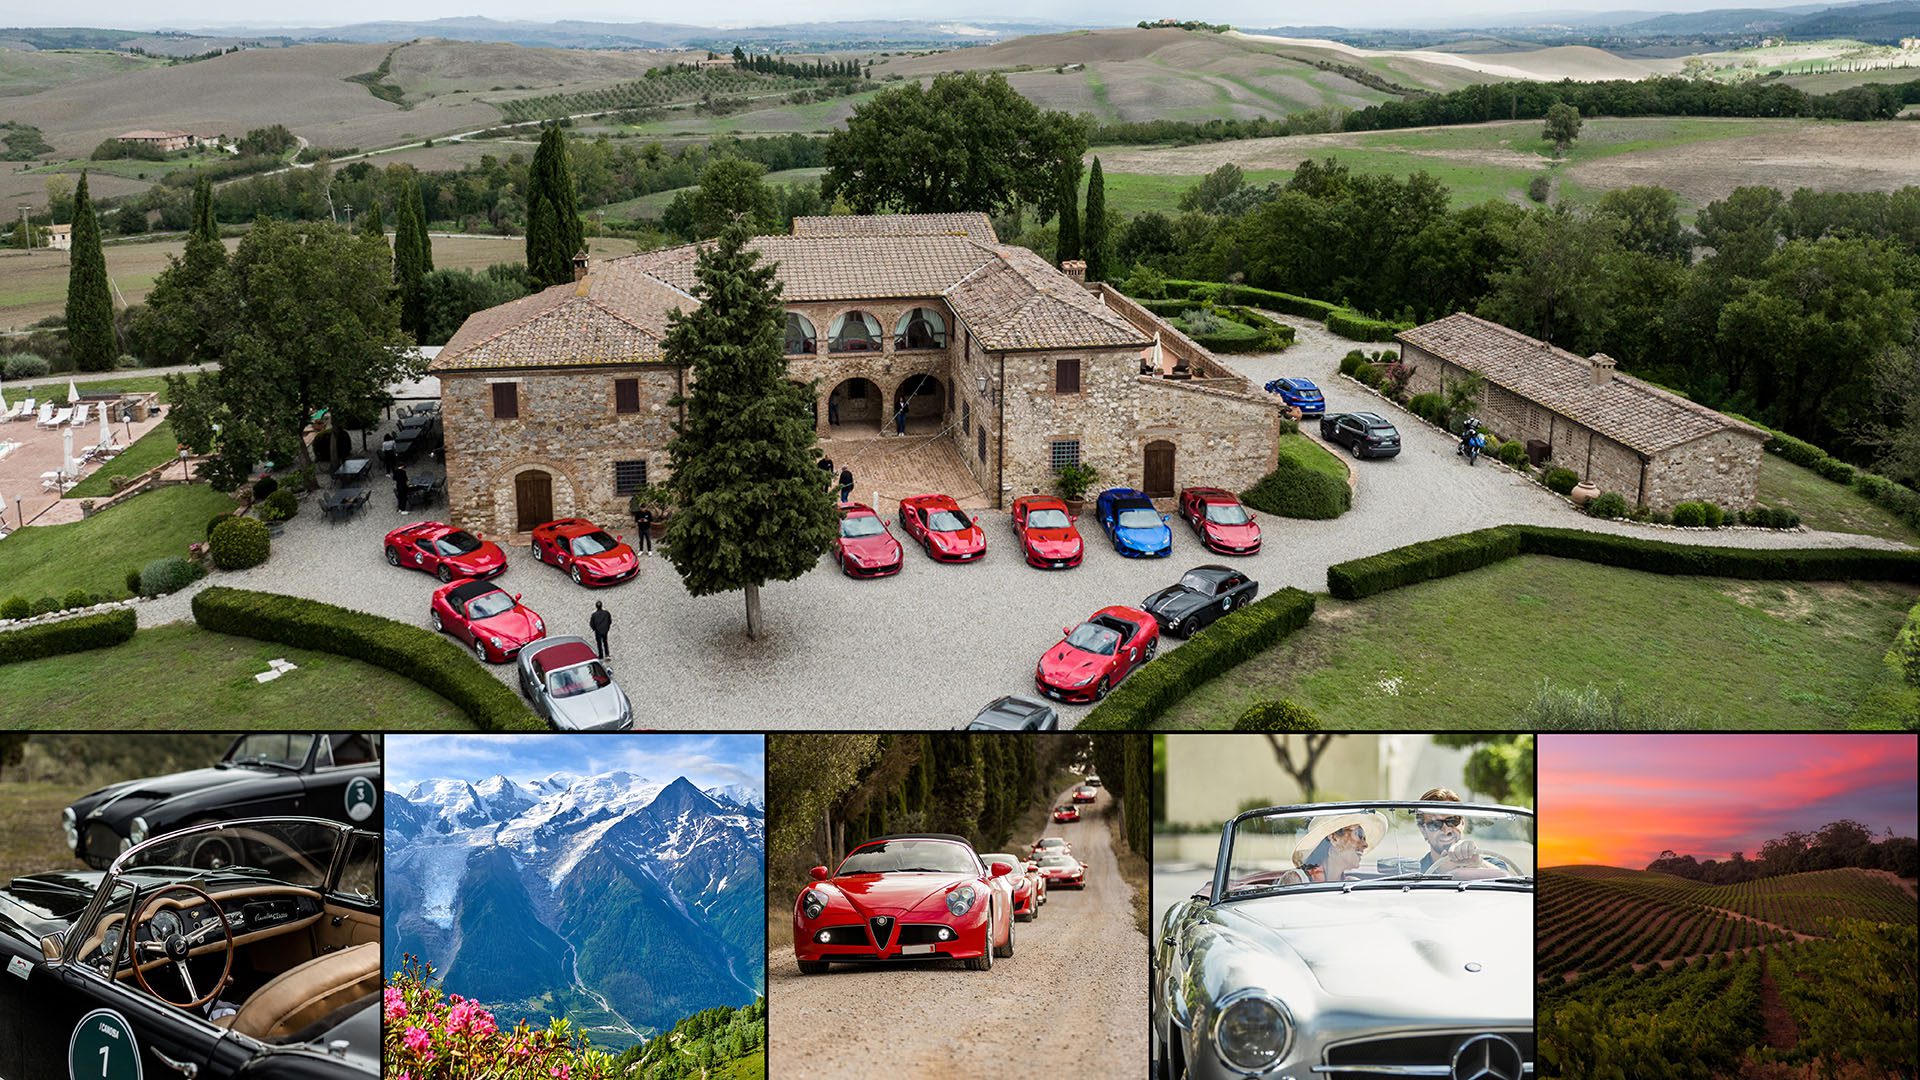 The Most Luxurious Road Trip When At The Alps & Napa Valley